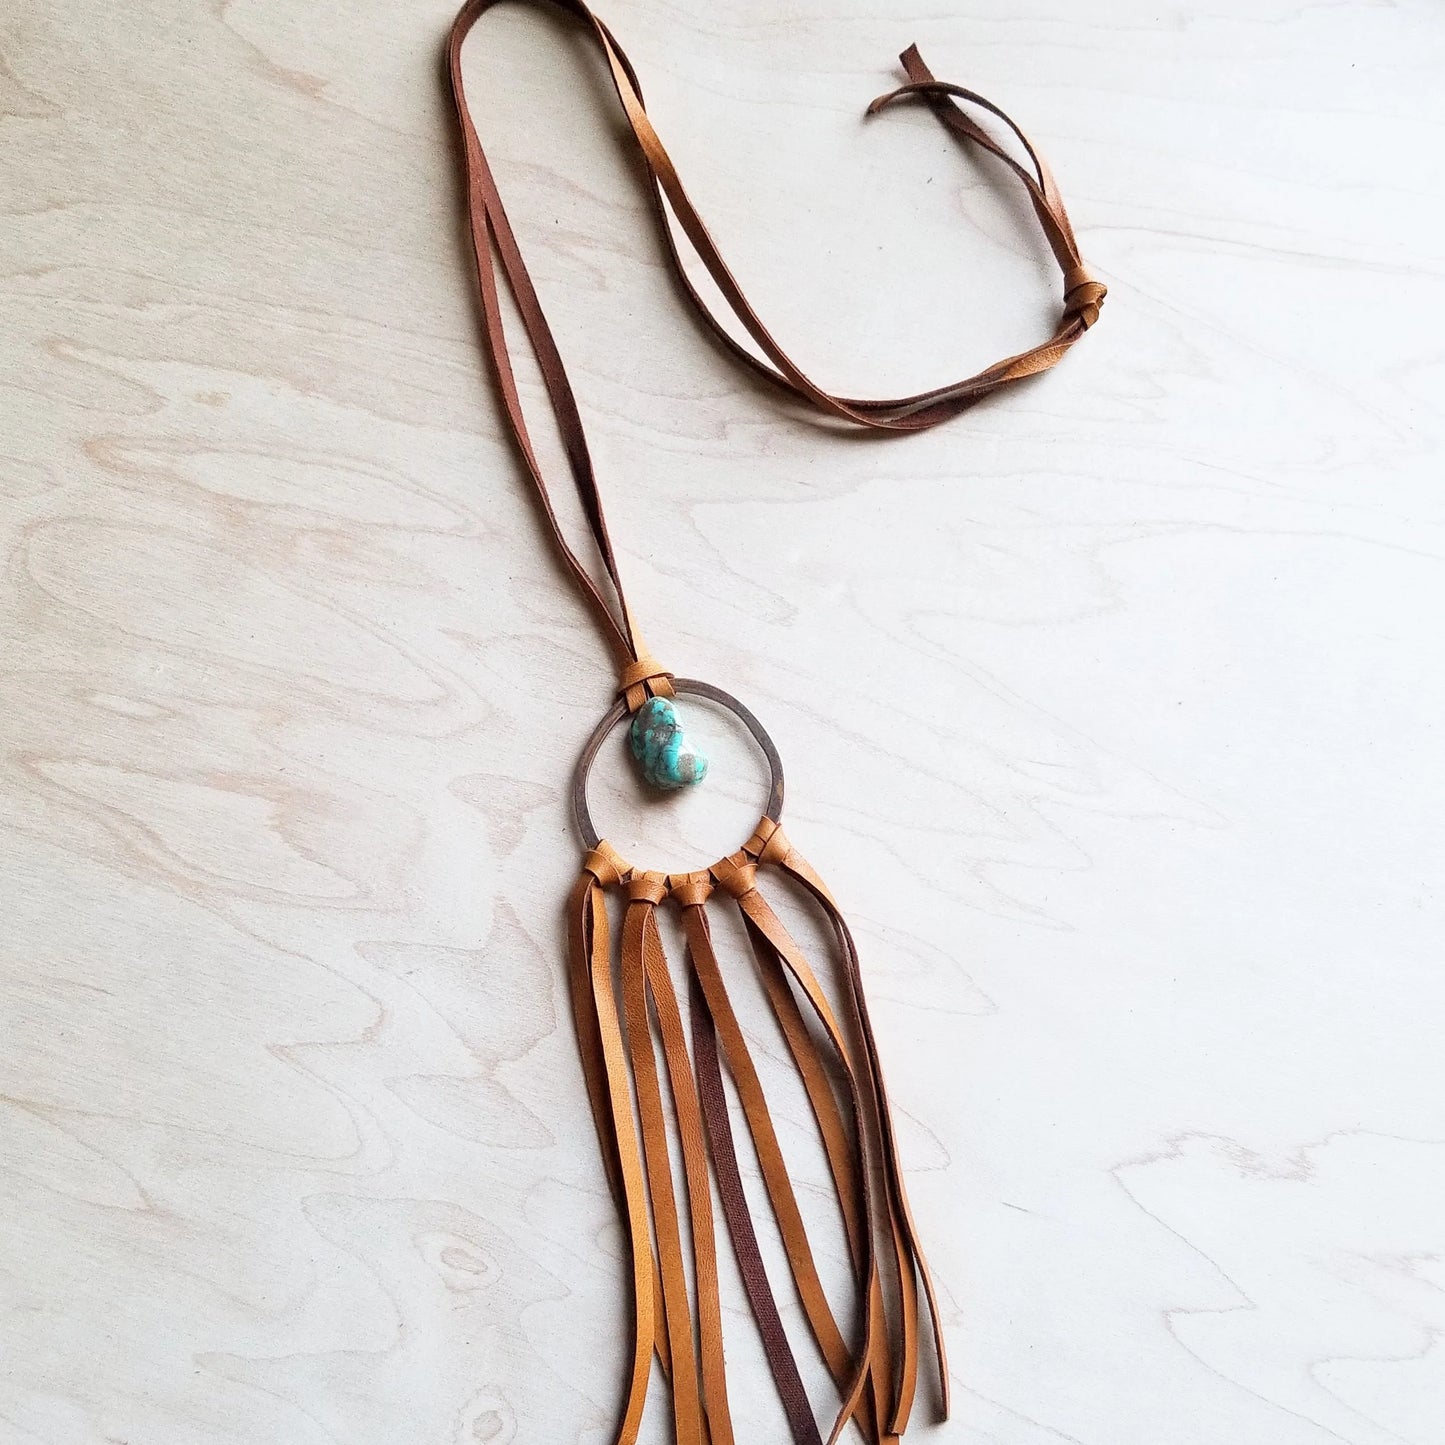 Tan Leather Dream Catcher Necklace with Turquoise Chunk